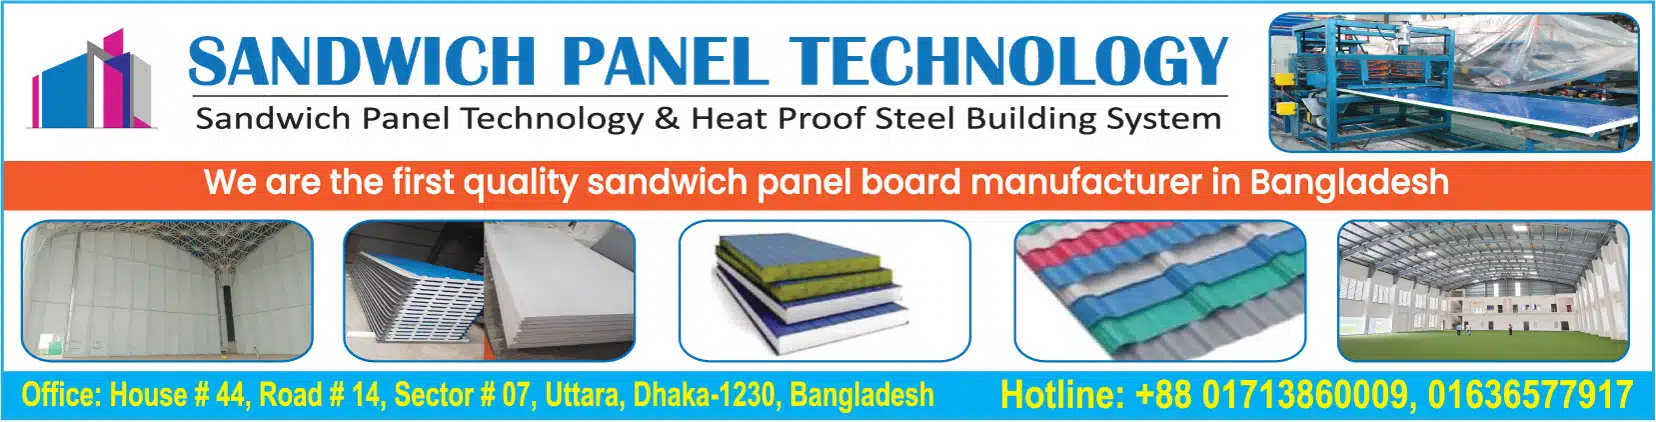 Sandwich Panel Technology Home Page Ad